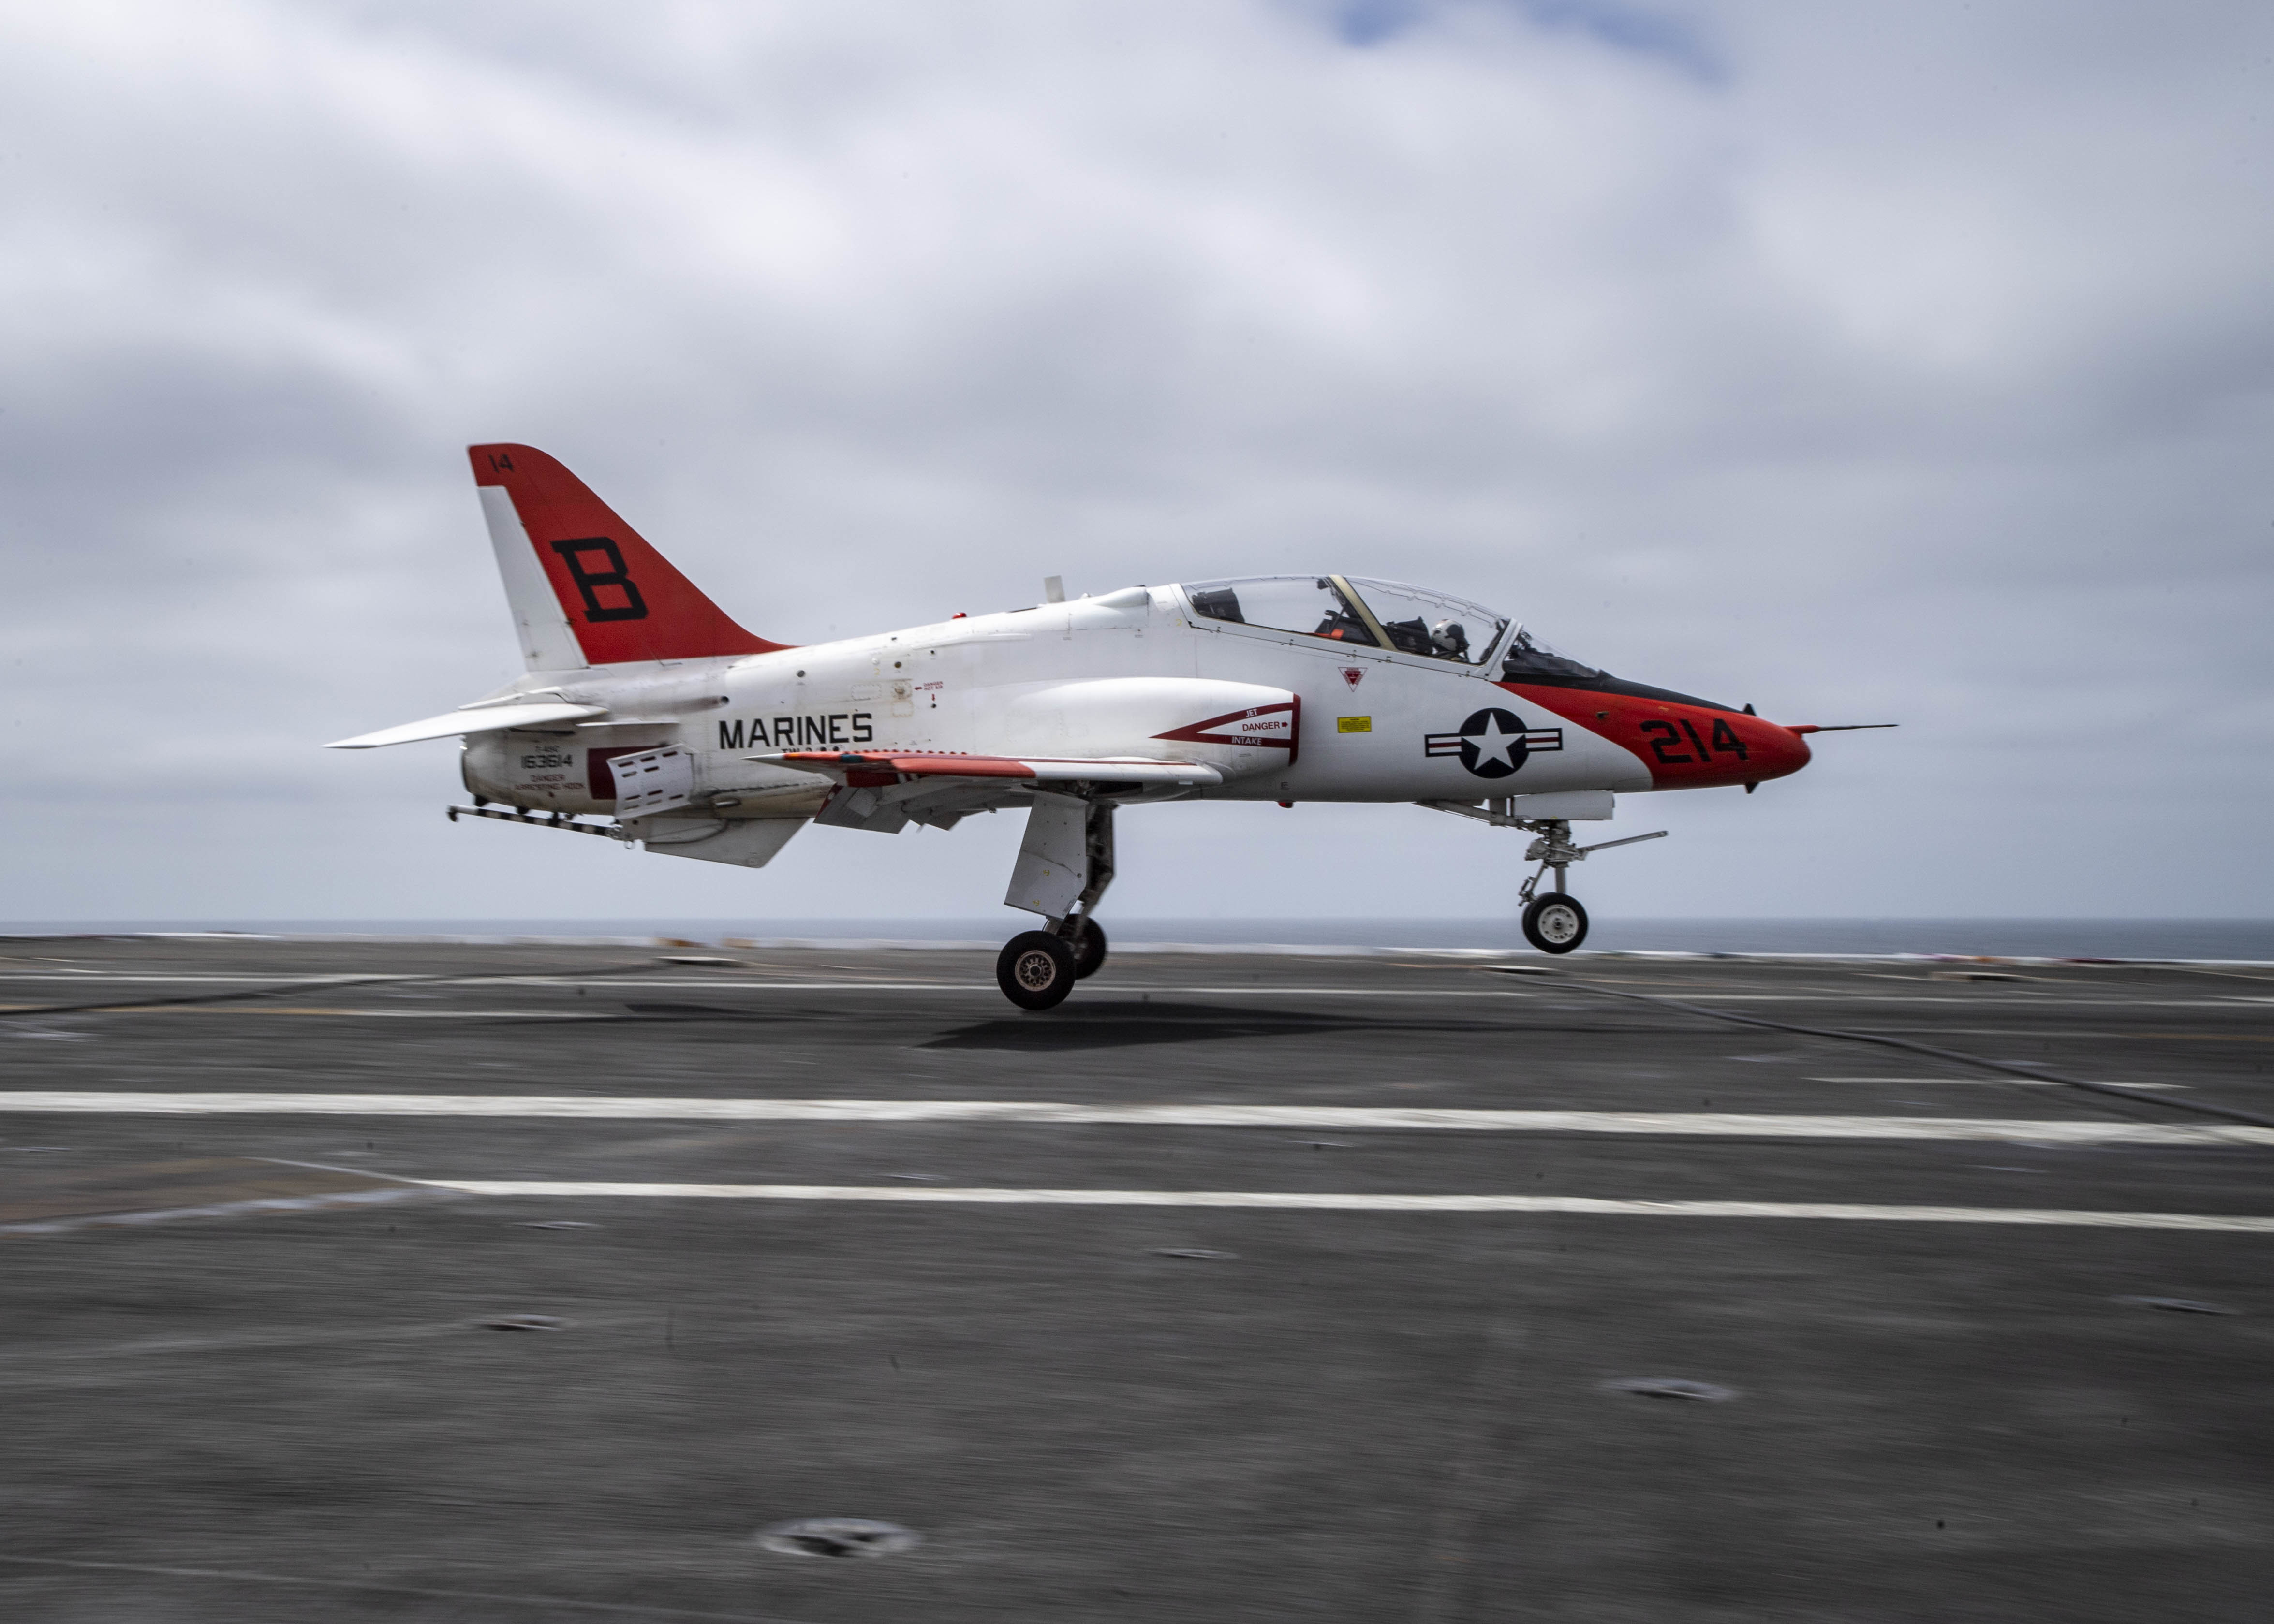 Navy ends safety standdown for part of the T-45C Goshawk jet fleet